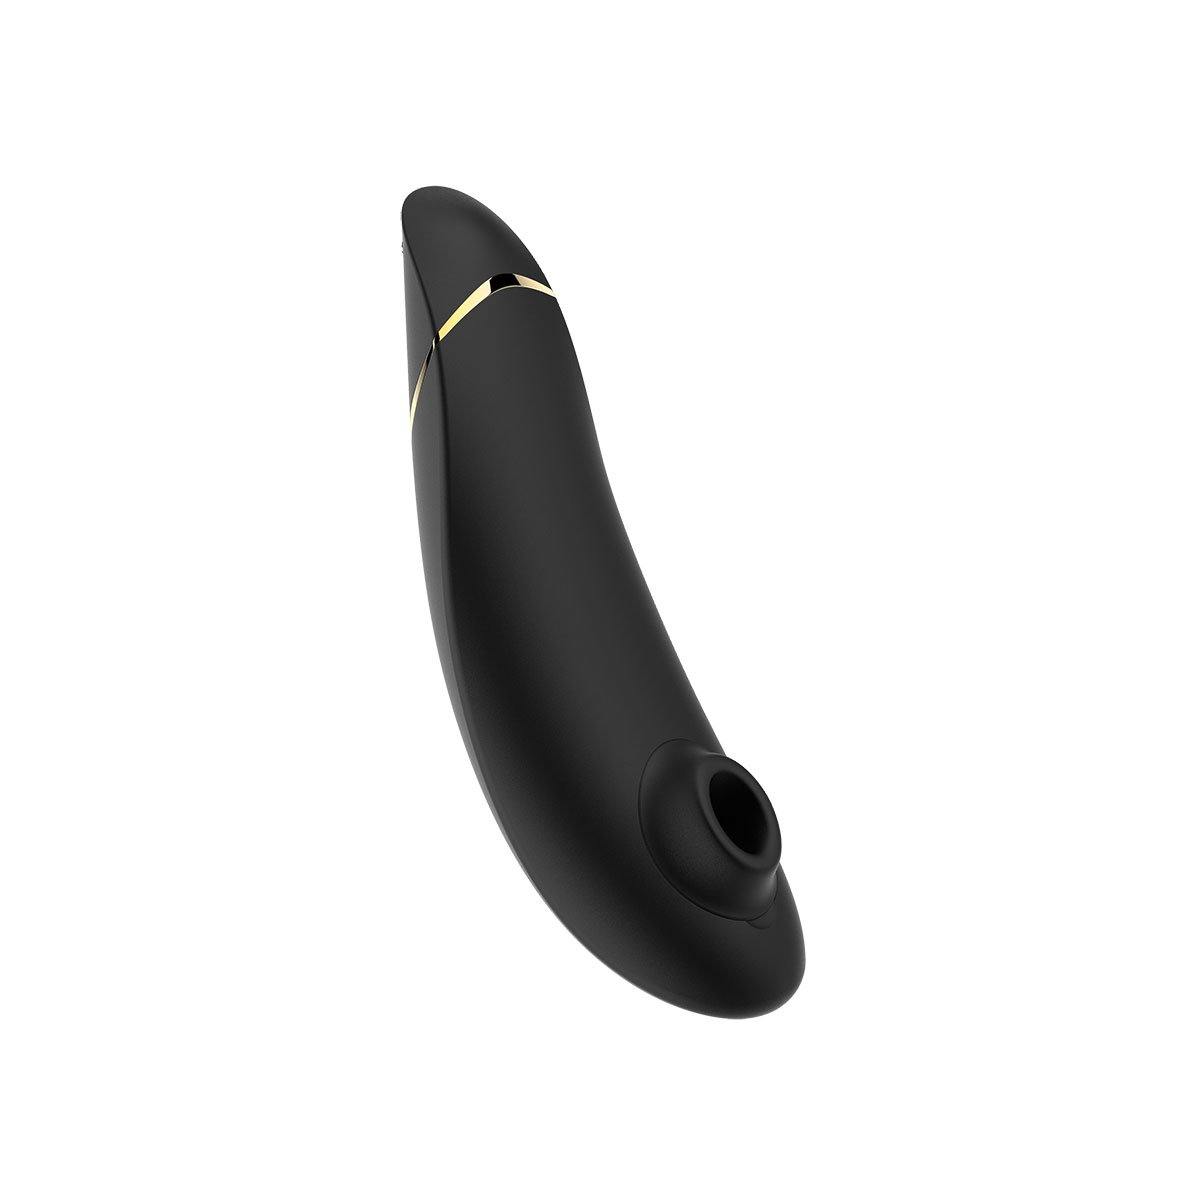 Womanizer And We-vibe Golden Moments - Buy At Luxury Toy X - Free 3-Day Shipping